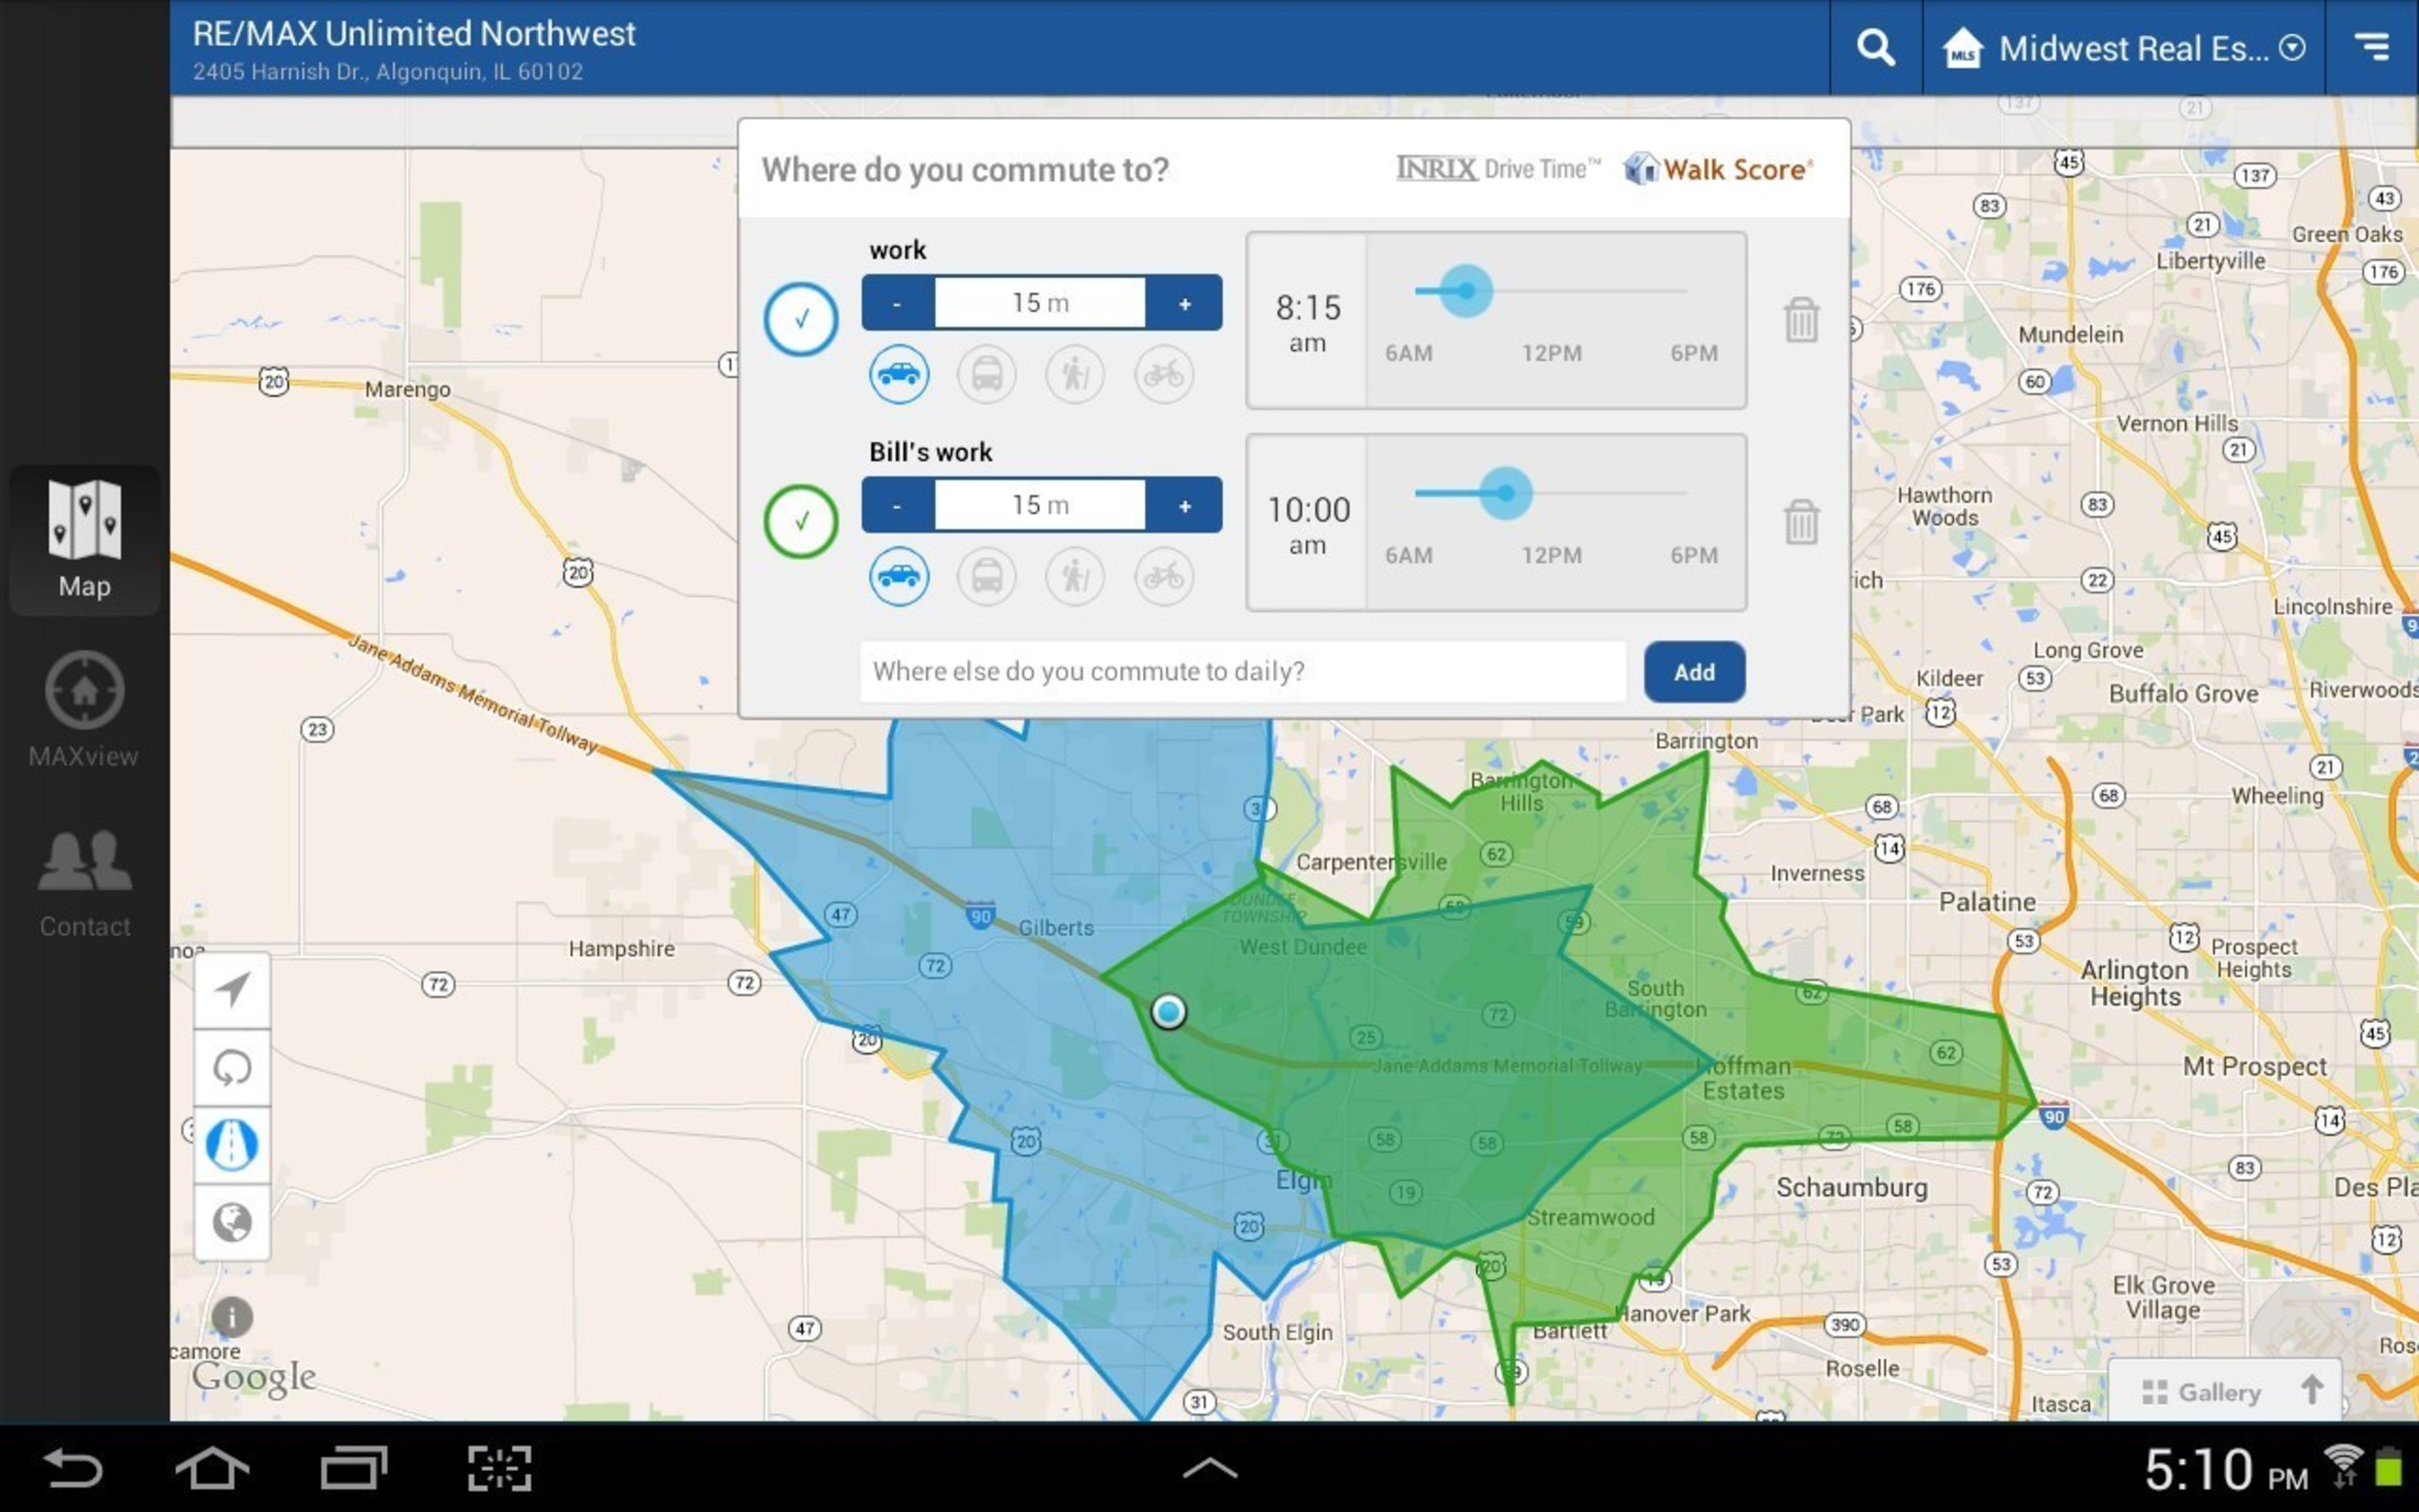 Commute Time Search on the RE/MAX Northern Illinois Real Estate App has its easy-to-use and touch-friendly design that makes it effortless to input desired destinations, such as work, a child's school or another important place. In the example above, homes for sale in the blue area meet the criteria entered by one person, while homes in the light green area meet the criteria of a second individual. The dark green area contains those homes for sale that meet the travel-time criteria of both persons.